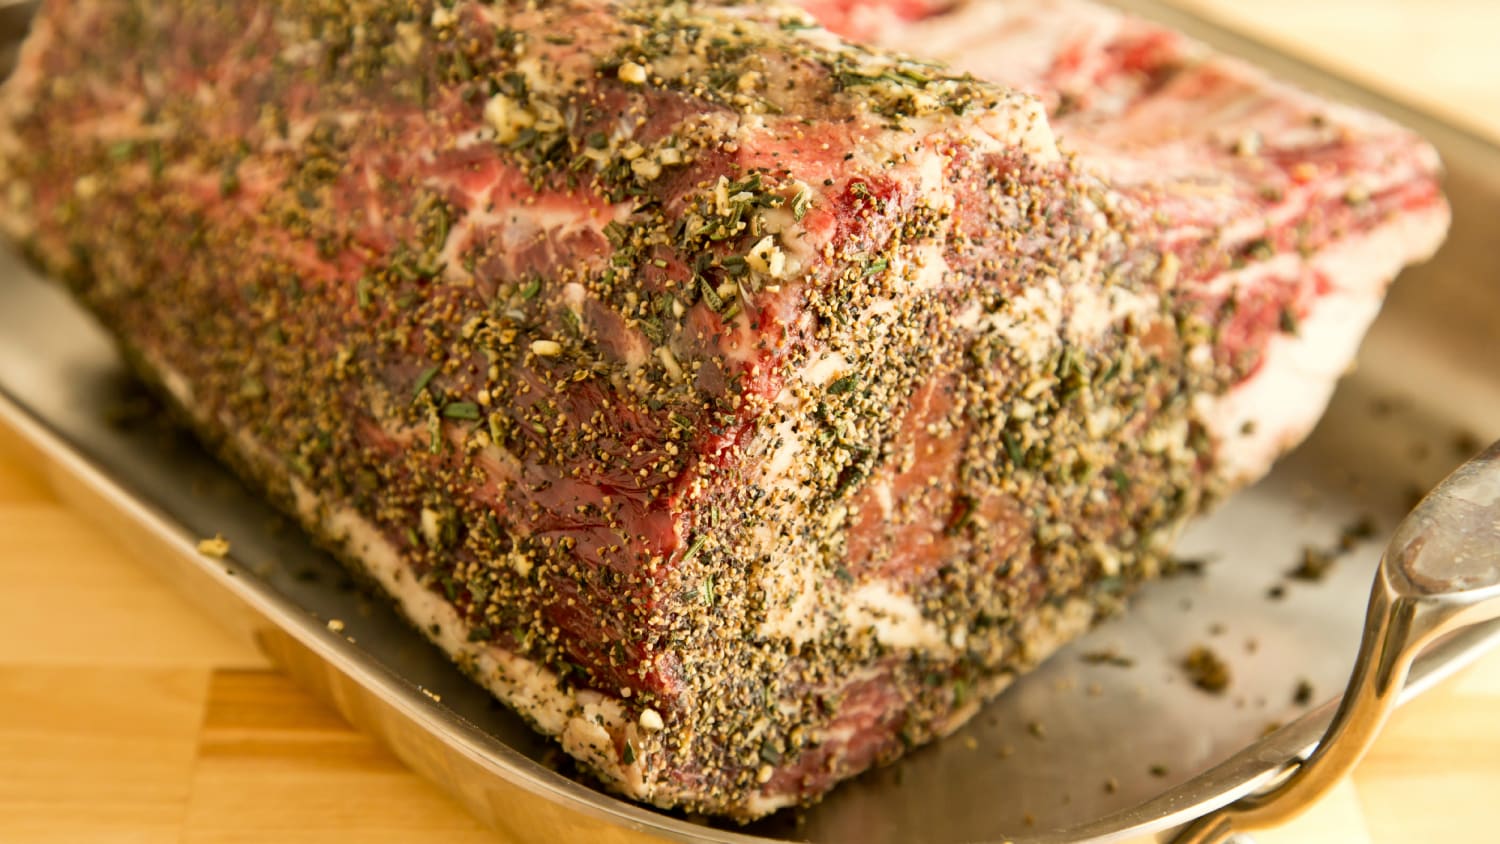 Holiday Prime Rib Roast Today Com,Toffee Recipe How To Make Toffee